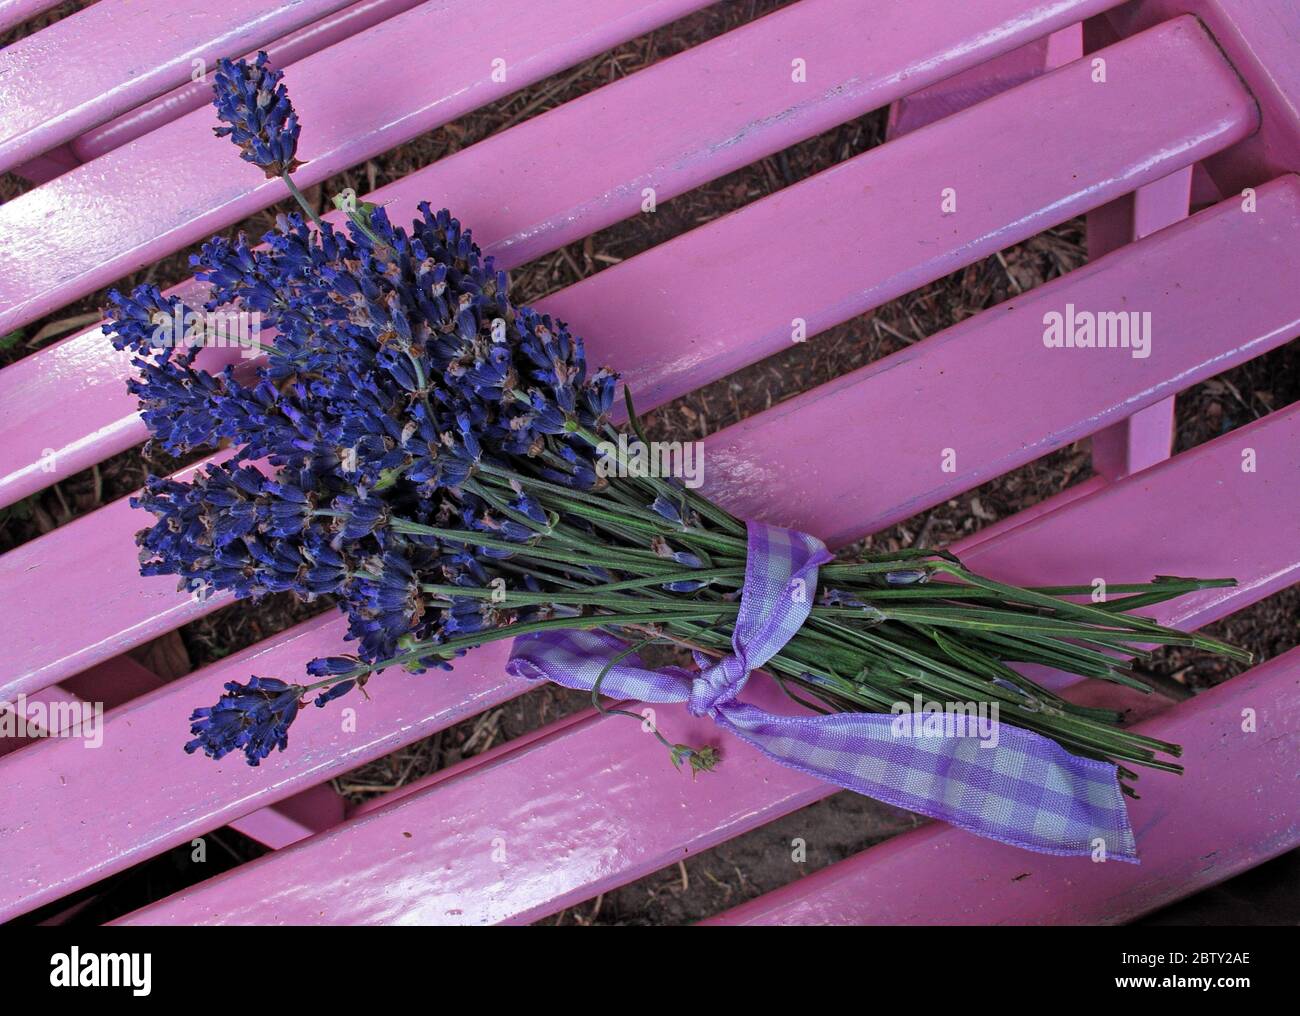 Bunch of purple lavender on a pink bench - natural pot pourri Stock Photo